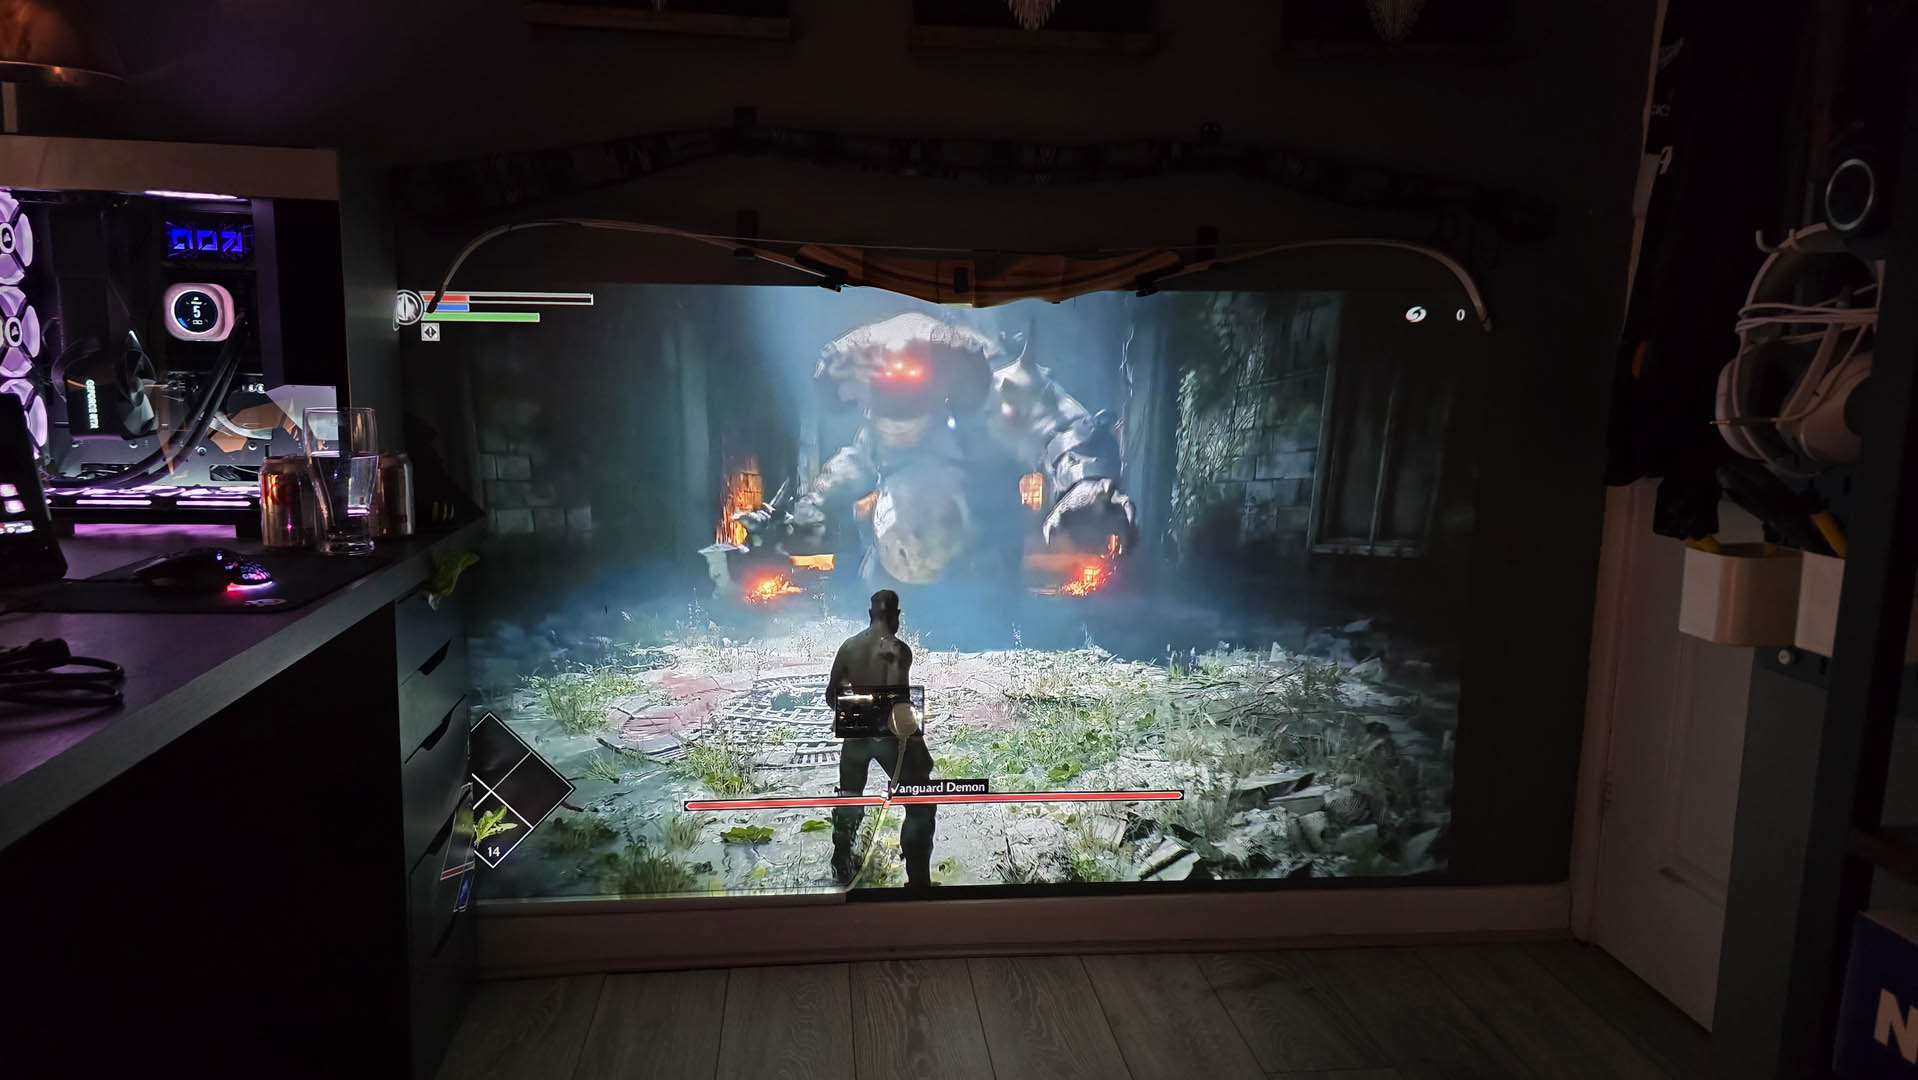 Gaming screen from the BenQ X500i gaming projector